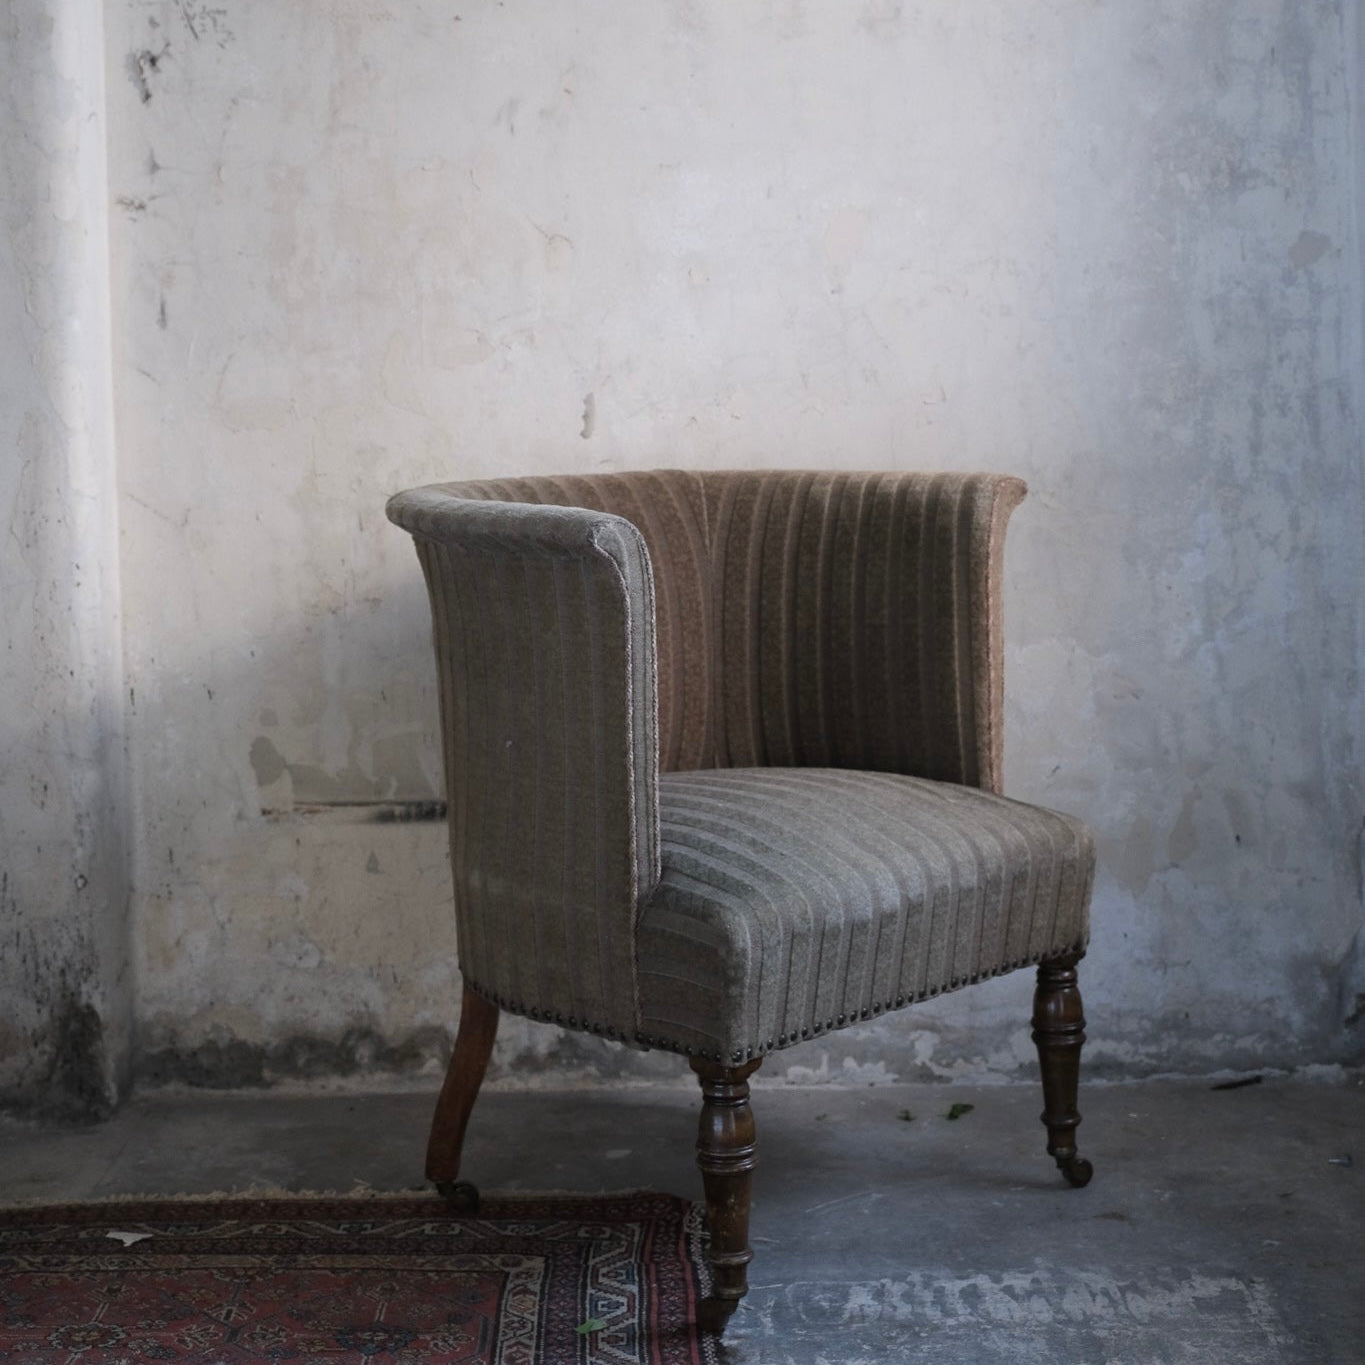 19thC Upholstered Tub Chair - Flared top edge